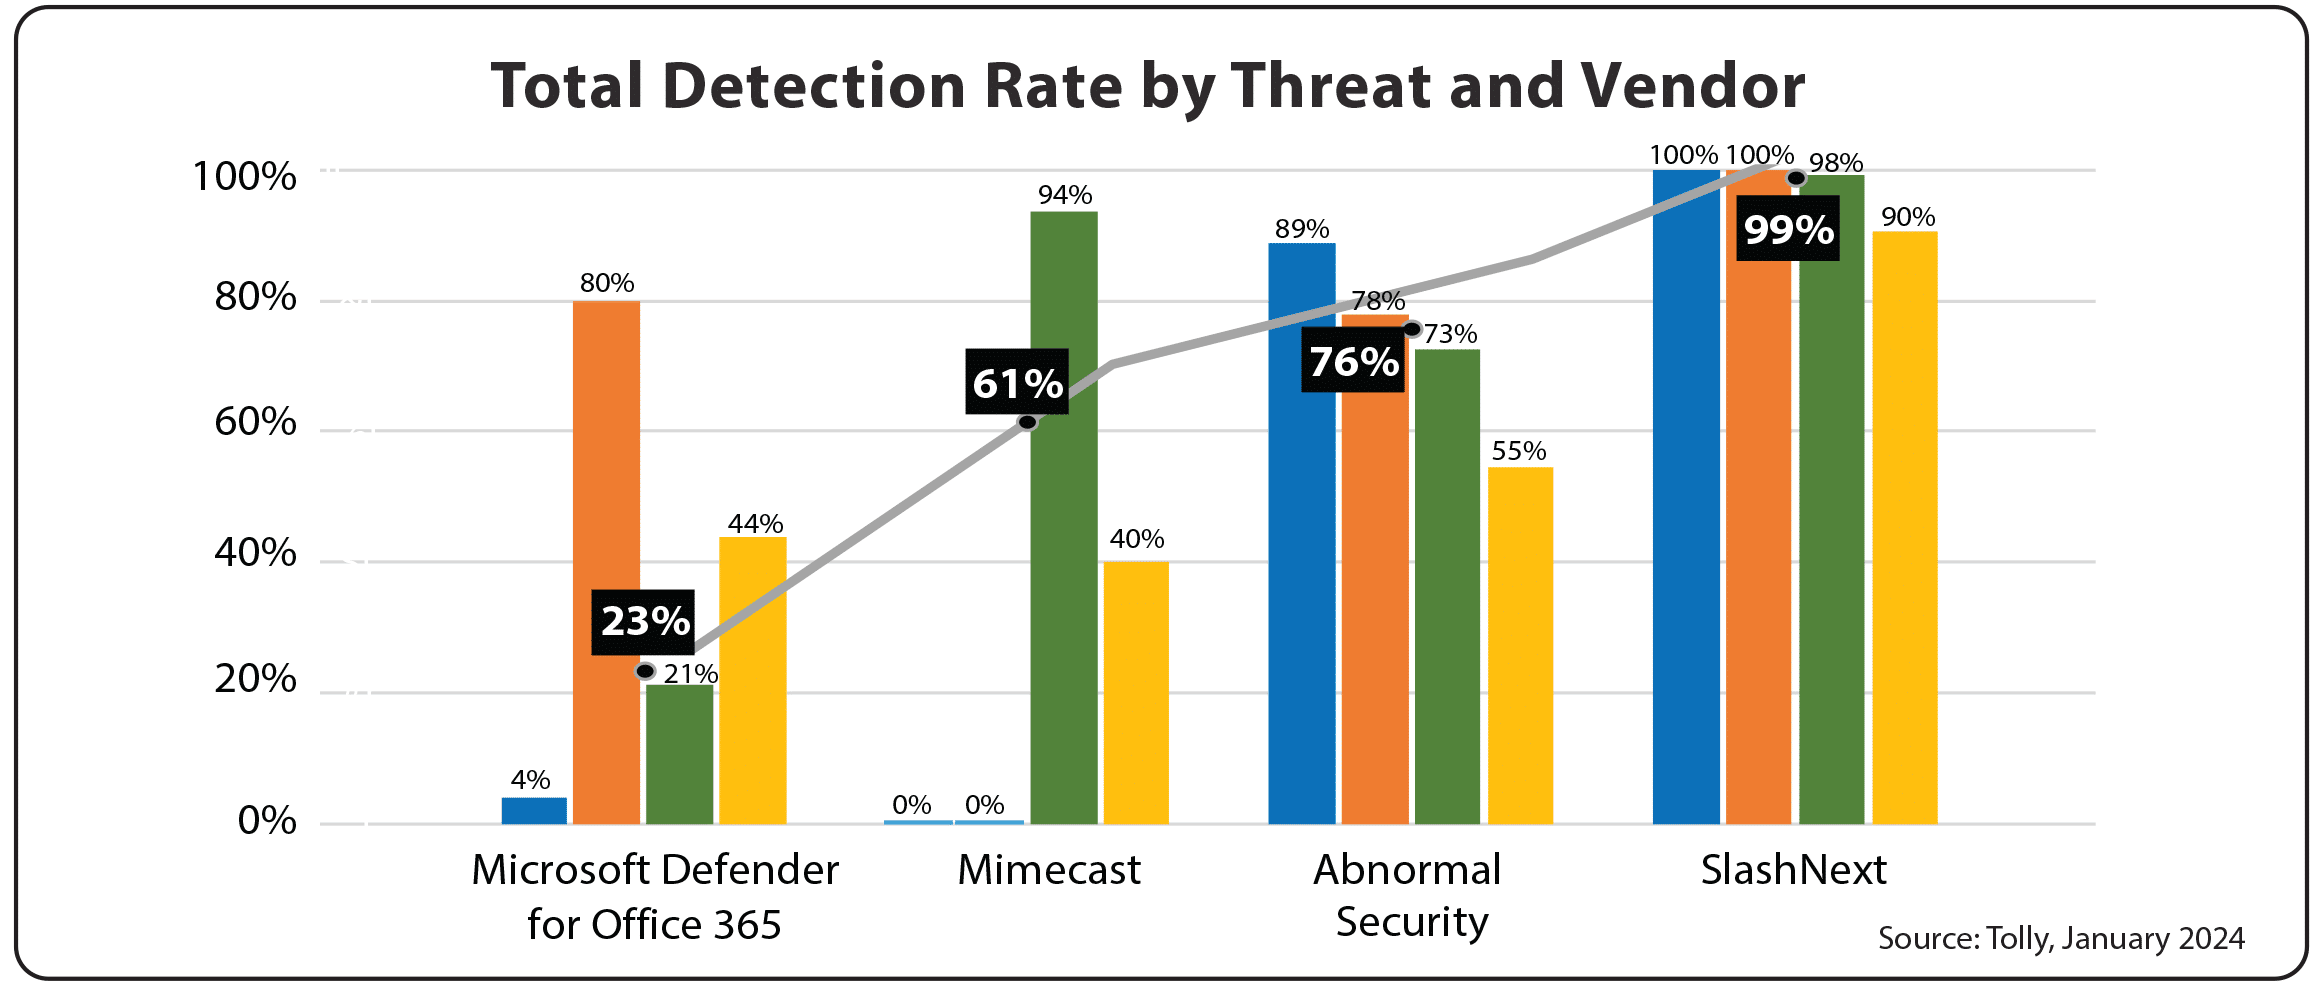 SlashNext demonstrated a higher detection rate across all four vectors